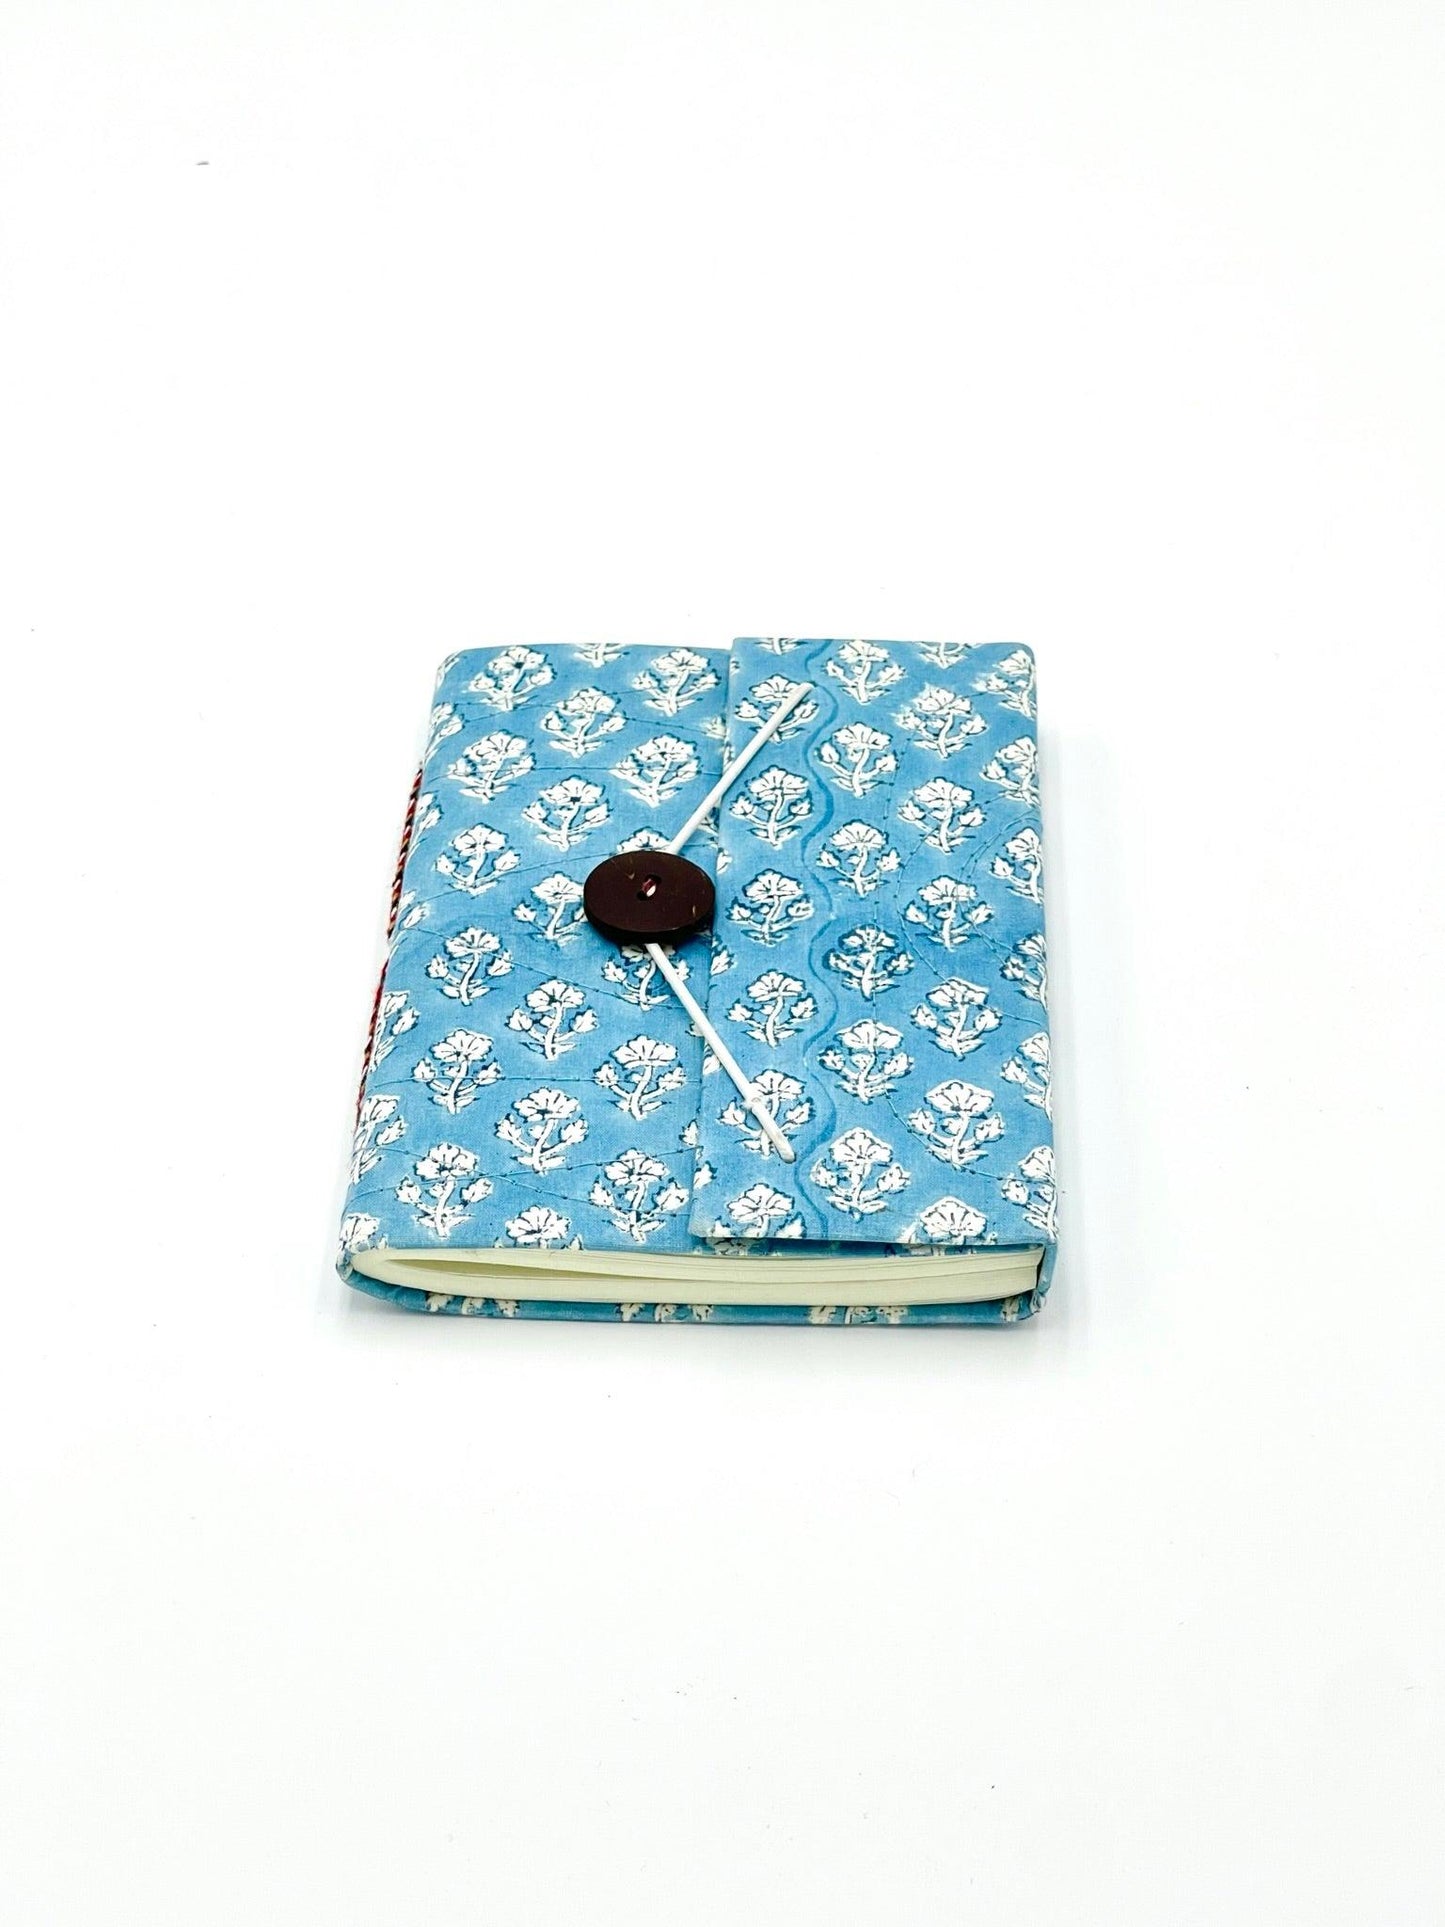 Block Print Journal/Notebook, Light Blue & White Floral - Unlined, 100 Pages, Thick Paper, Hard Cover - Transcend